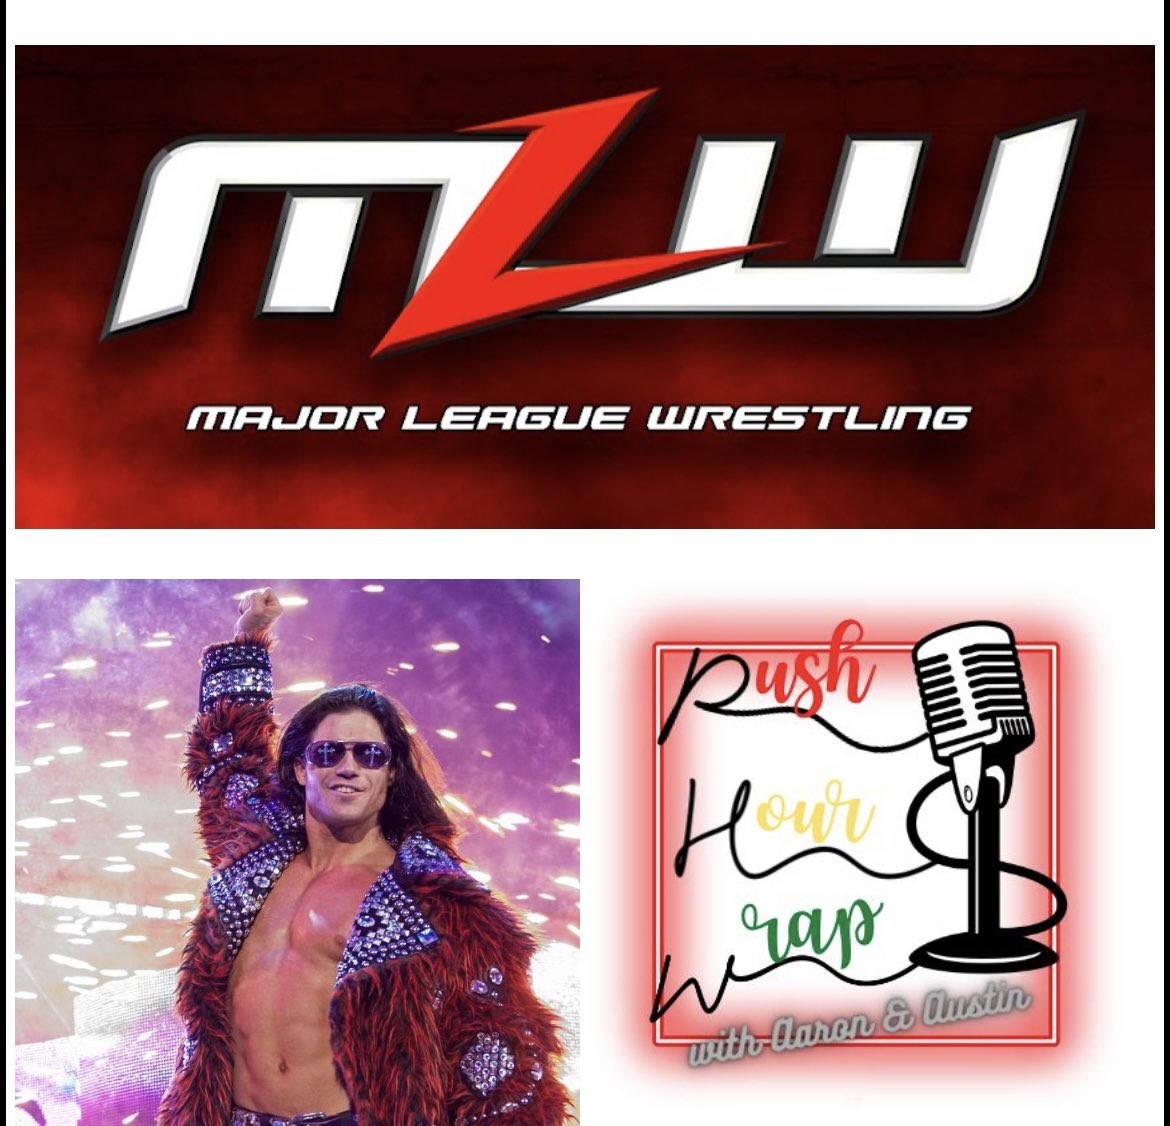 John Hennigan, previously known as
John Morrison in the WWE will be on Rush Hour Wrap tomorrow at 3:45pm to discuss Major League Wrestling which launched in Philly in 2002! 

#wrestling #wrestlinglife #WrestlingCommunity #johnmorrison #wwe #MLW #fyp #follow #radio #tunein